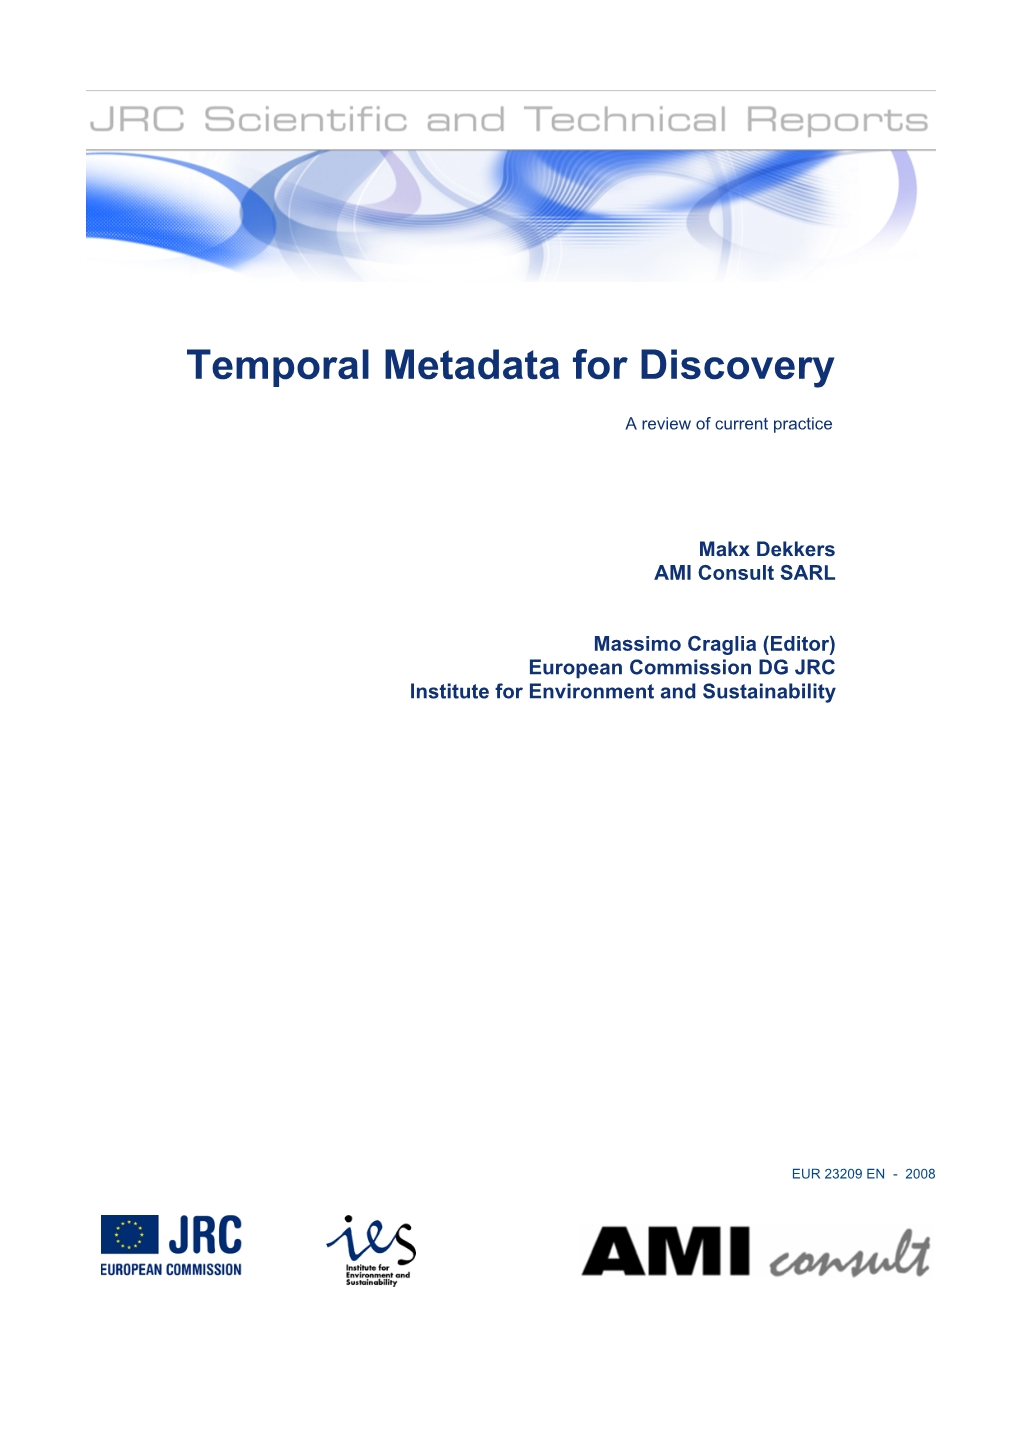 Temporal Metadata for Discovery